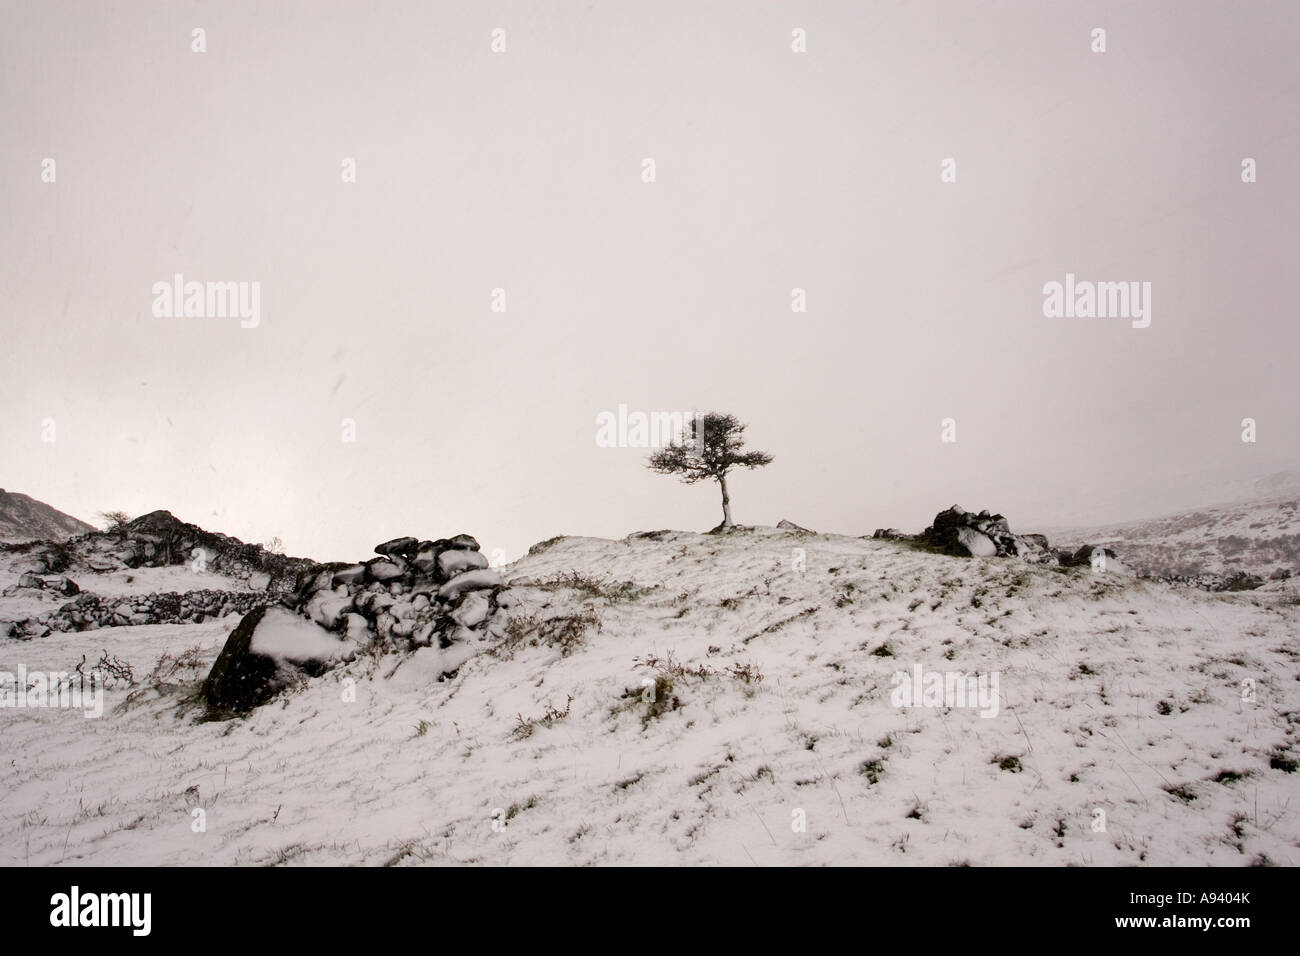 One lone tree in a blizzard of snow in a snow covered landscape in the Cooley mountains county Louth Ireland Stock Photo